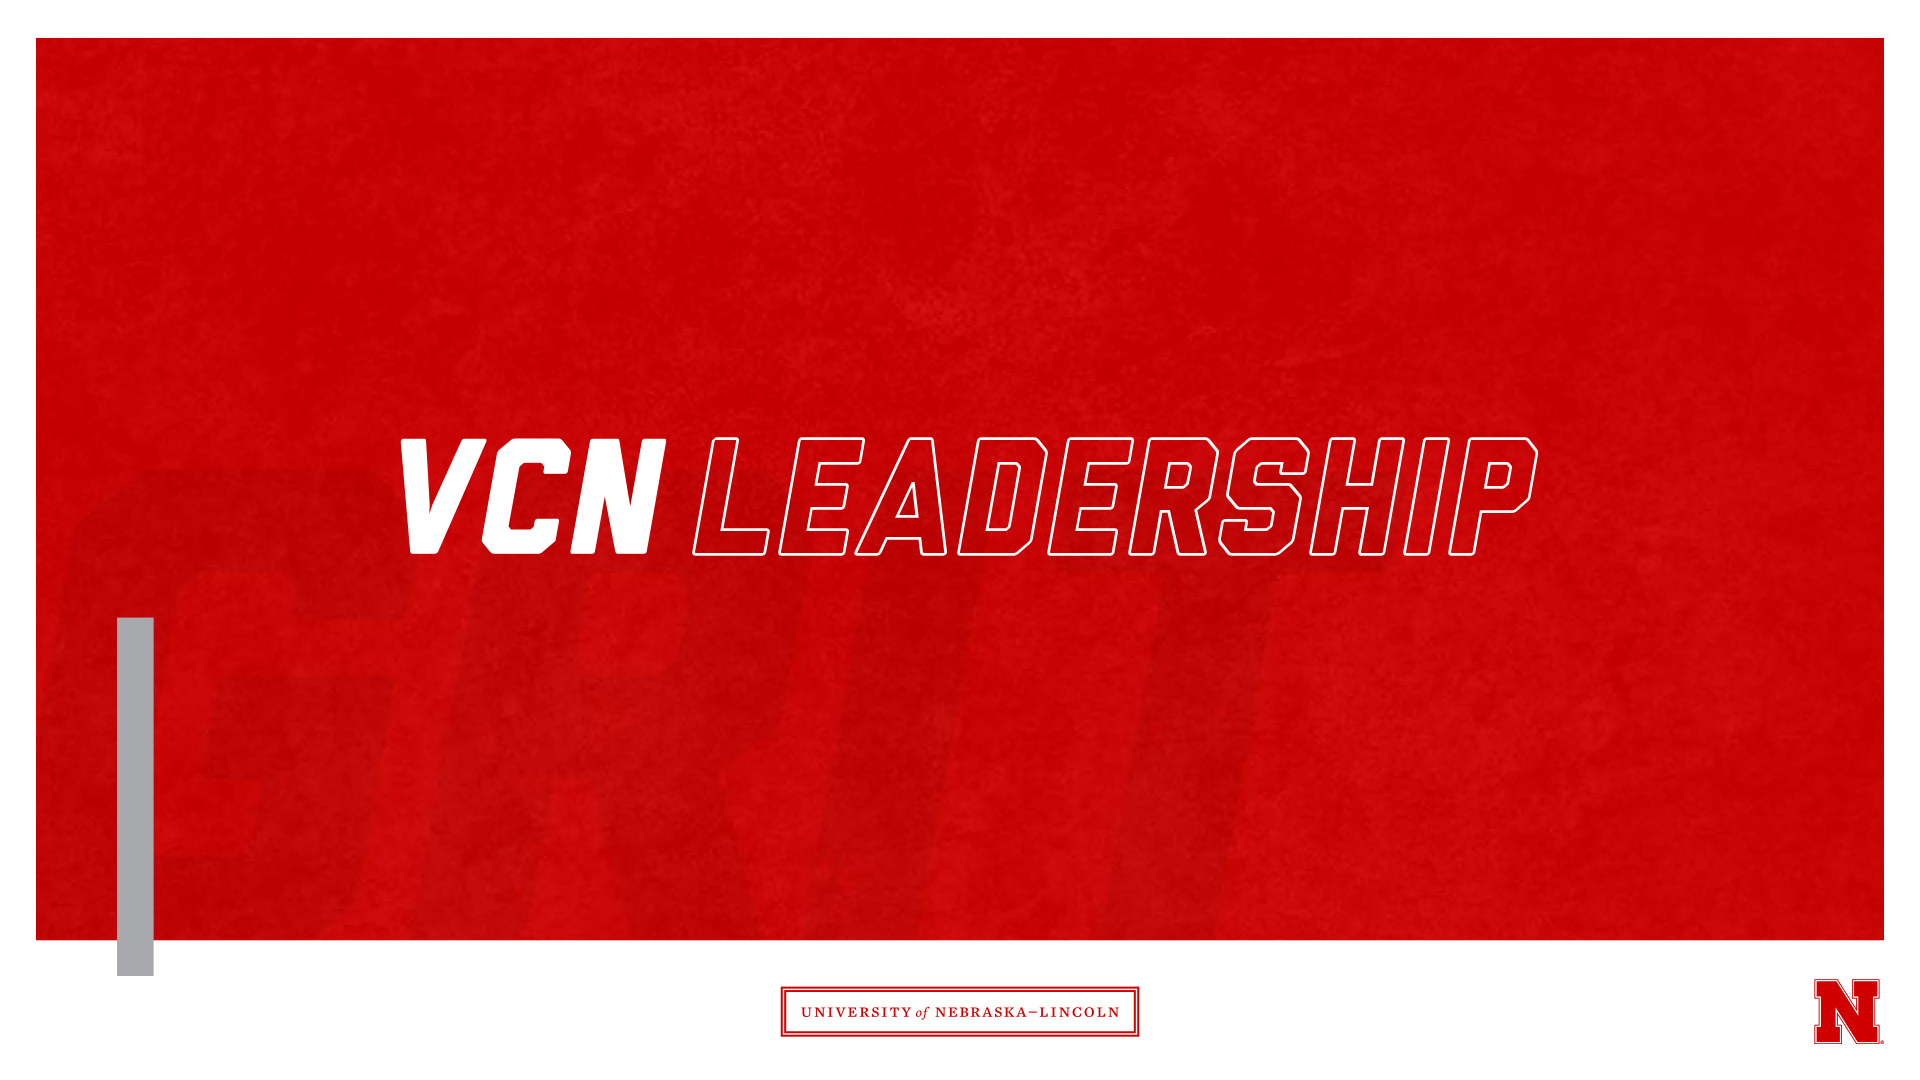 Graphic reads "VCN Leadership"